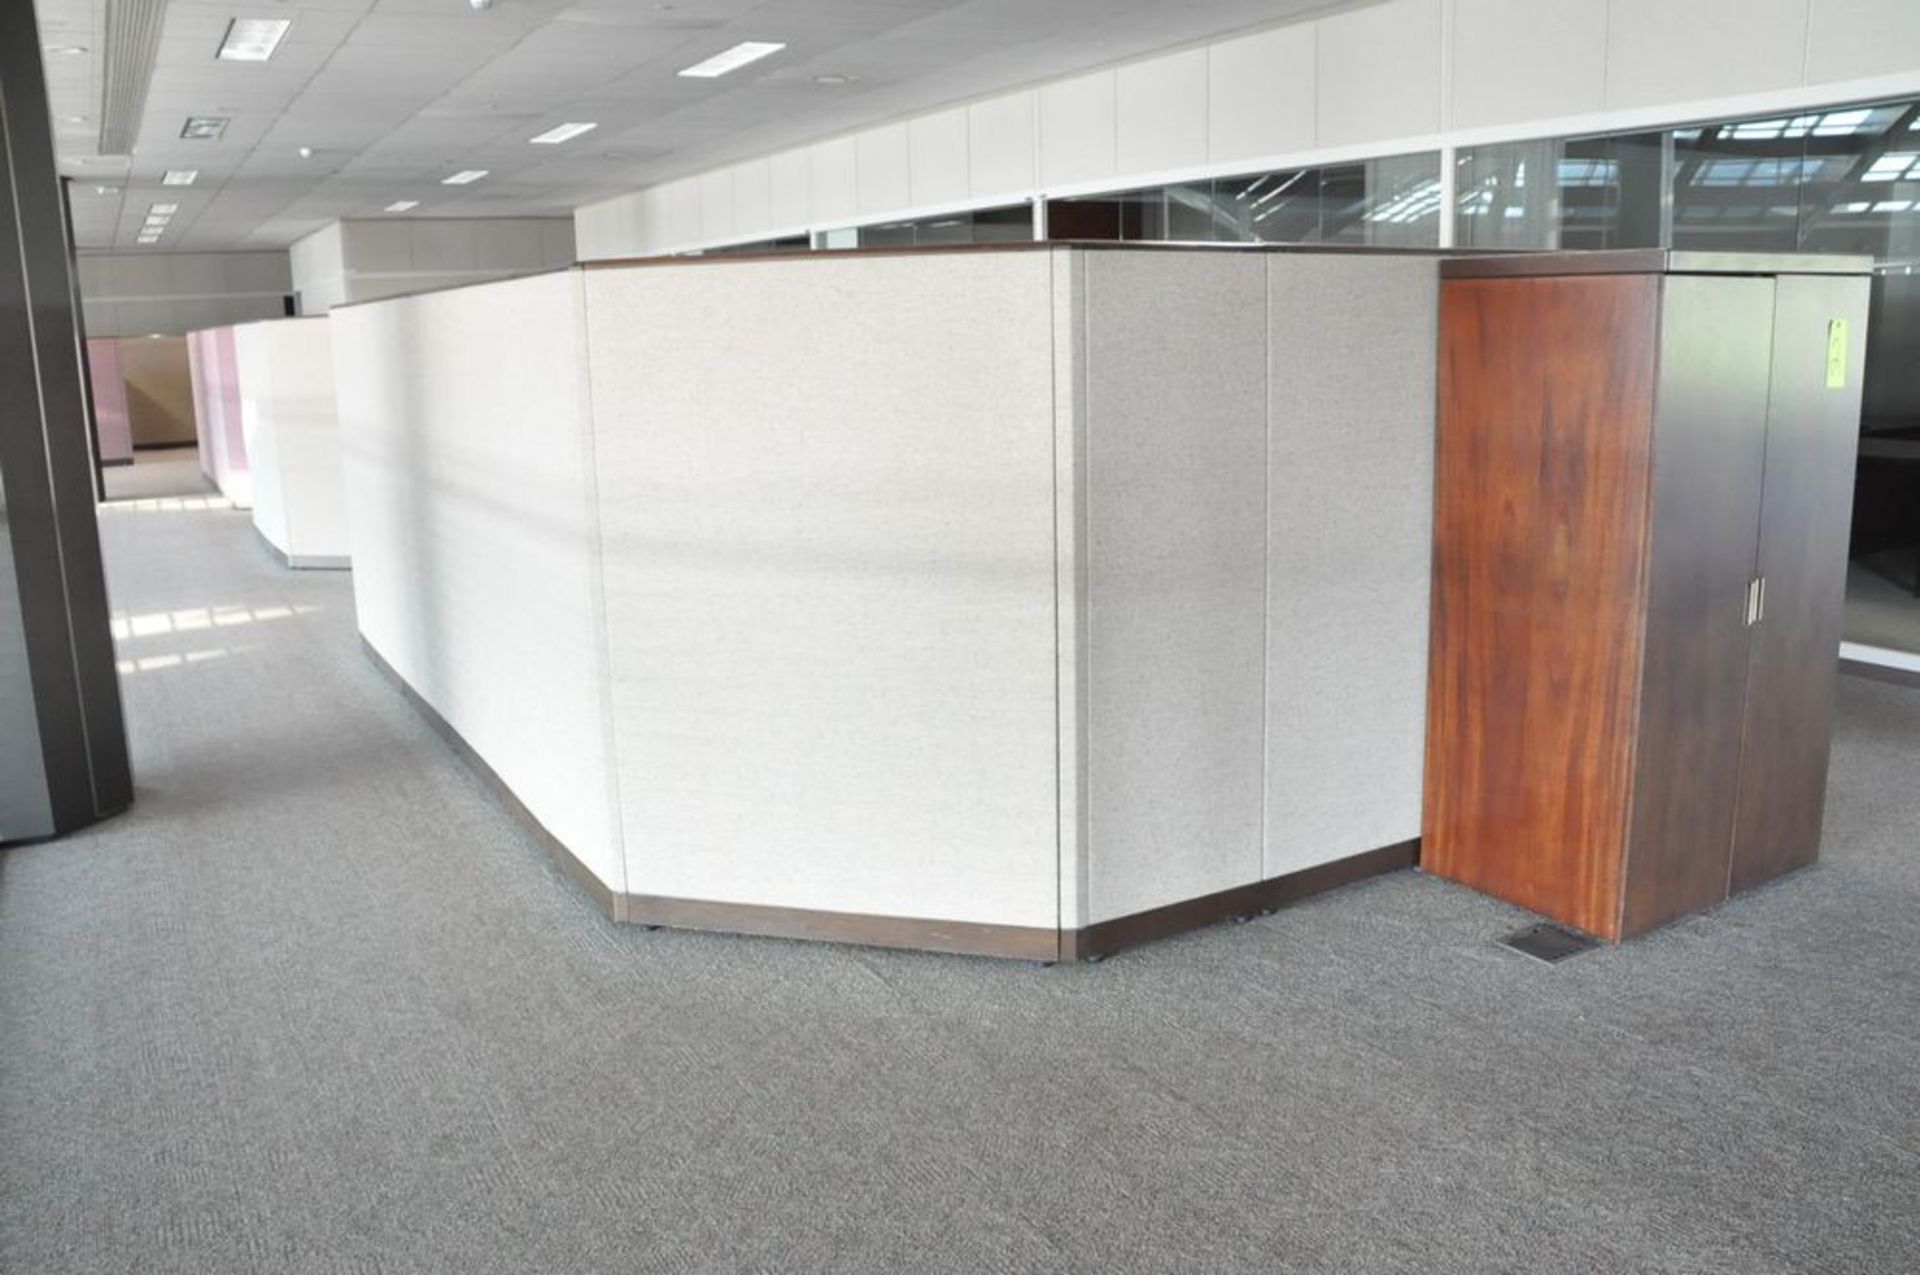 Lot-(5) Station Cubical Partition Work System with Furniture, (Atrium Edge), (4th Floor)